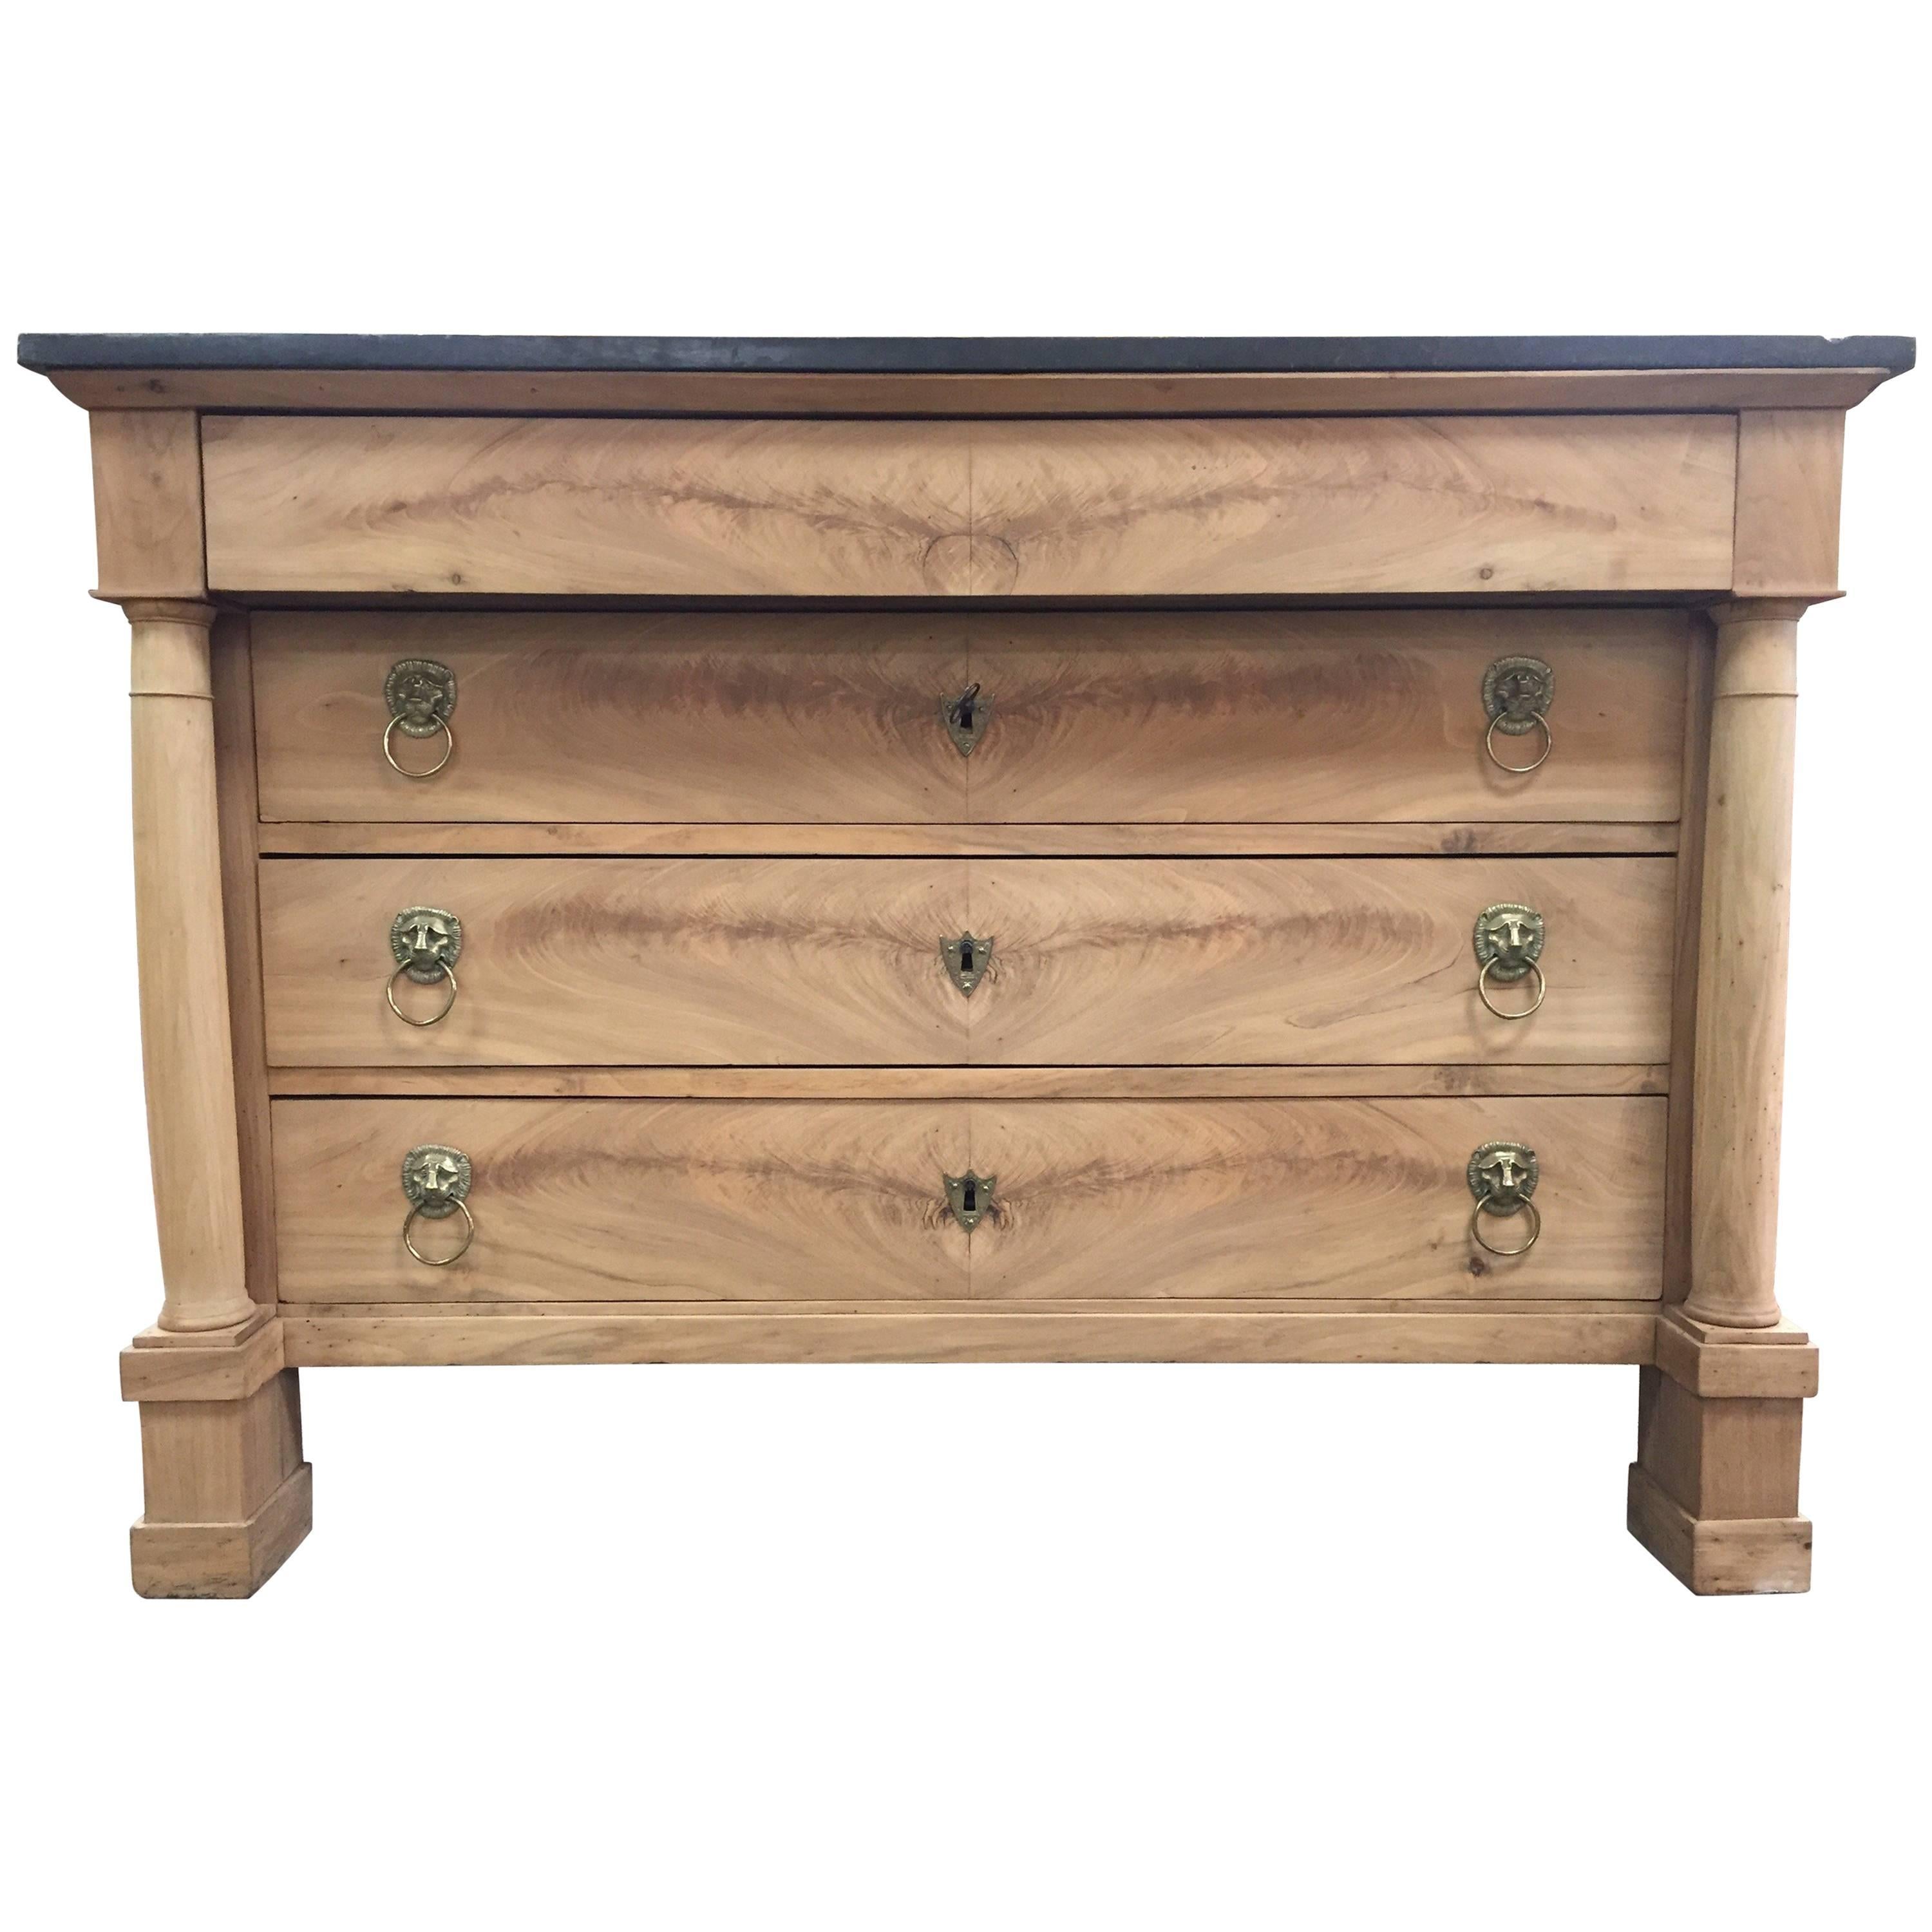 19th Century French Empire Commode in Bleached Walnut